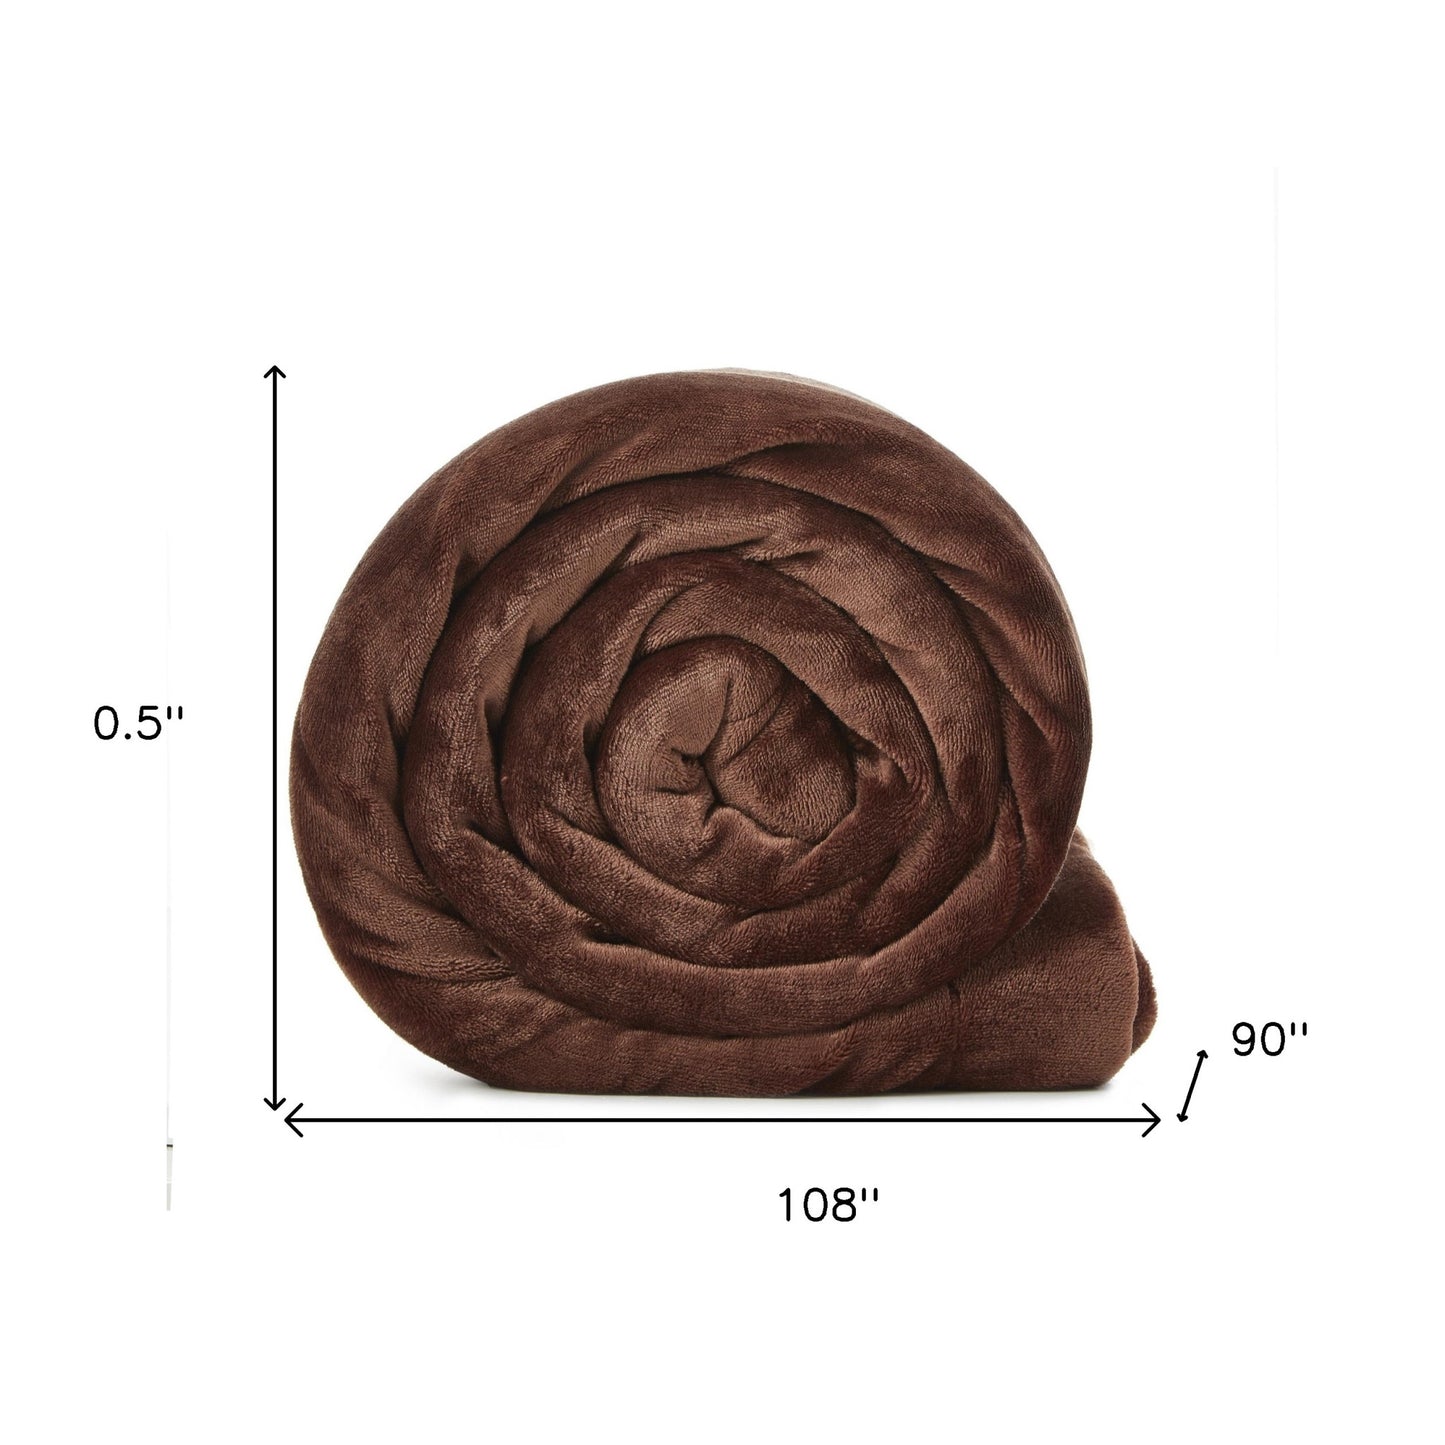 Brown Knitted PolYester Solid Color Plush King Blanket